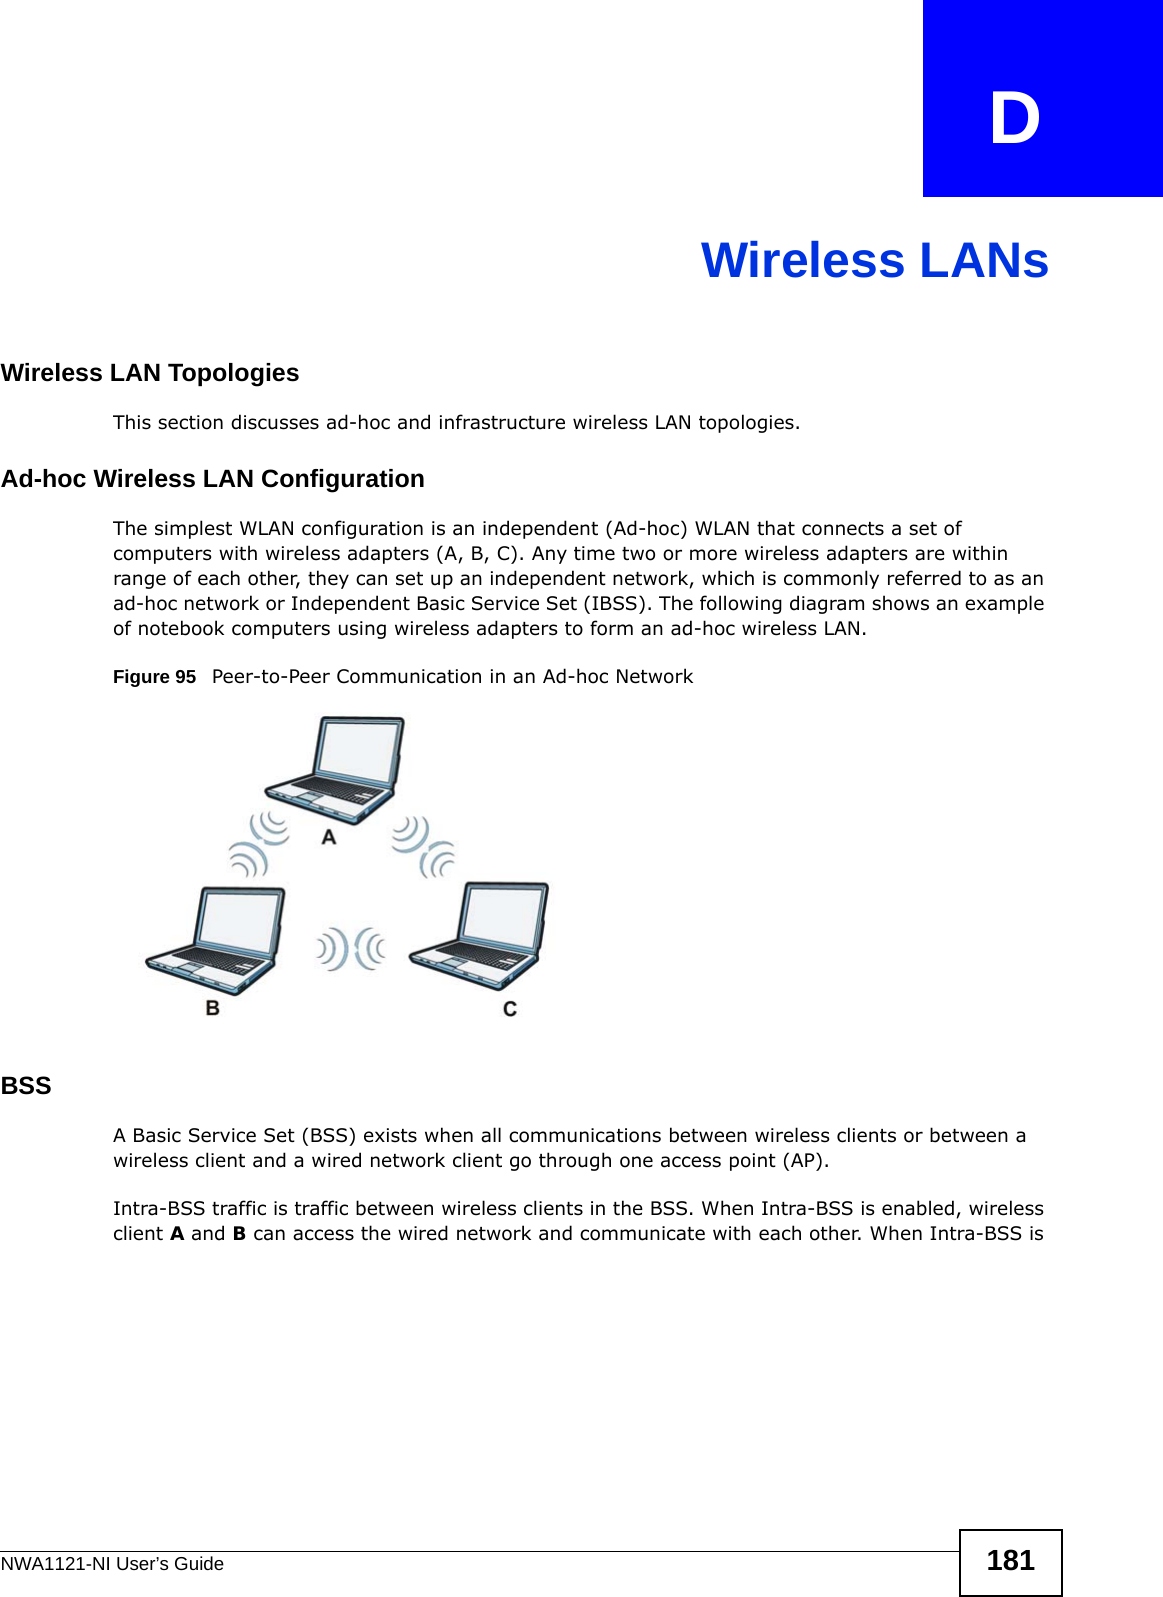 NWA1121-NI User’s Guide 181APPENDIX   DWireless LANsWireless LAN TopologiesThis section discusses ad-hoc and infrastructure wireless LAN topologies.Ad-hoc Wireless LAN ConfigurationThe simplest WLAN configuration is an independent (Ad-hoc) WLAN that connects a set of computers with wireless adapters (A, B, C). Any time two or more wireless adapters are within range of each other, they can set up an independent network, which is commonly referred to as an ad-hoc network or Independent Basic Service Set (IBSS). The following diagram shows an example of notebook computers using wireless adapters to form an ad-hoc wireless LAN. Figure 95   Peer-to-Peer Communication in an Ad-hoc NetworkBSSA Basic Service Set (BSS) exists when all communications between wireless clients or between a wireless client and a wired network client go through one access point (AP). Intra-BSS traffic is traffic between wireless clients in the BSS. When Intra-BSS is enabled, wireless client A and B can access the wired network and communicate with each other. When Intra-BSS is 